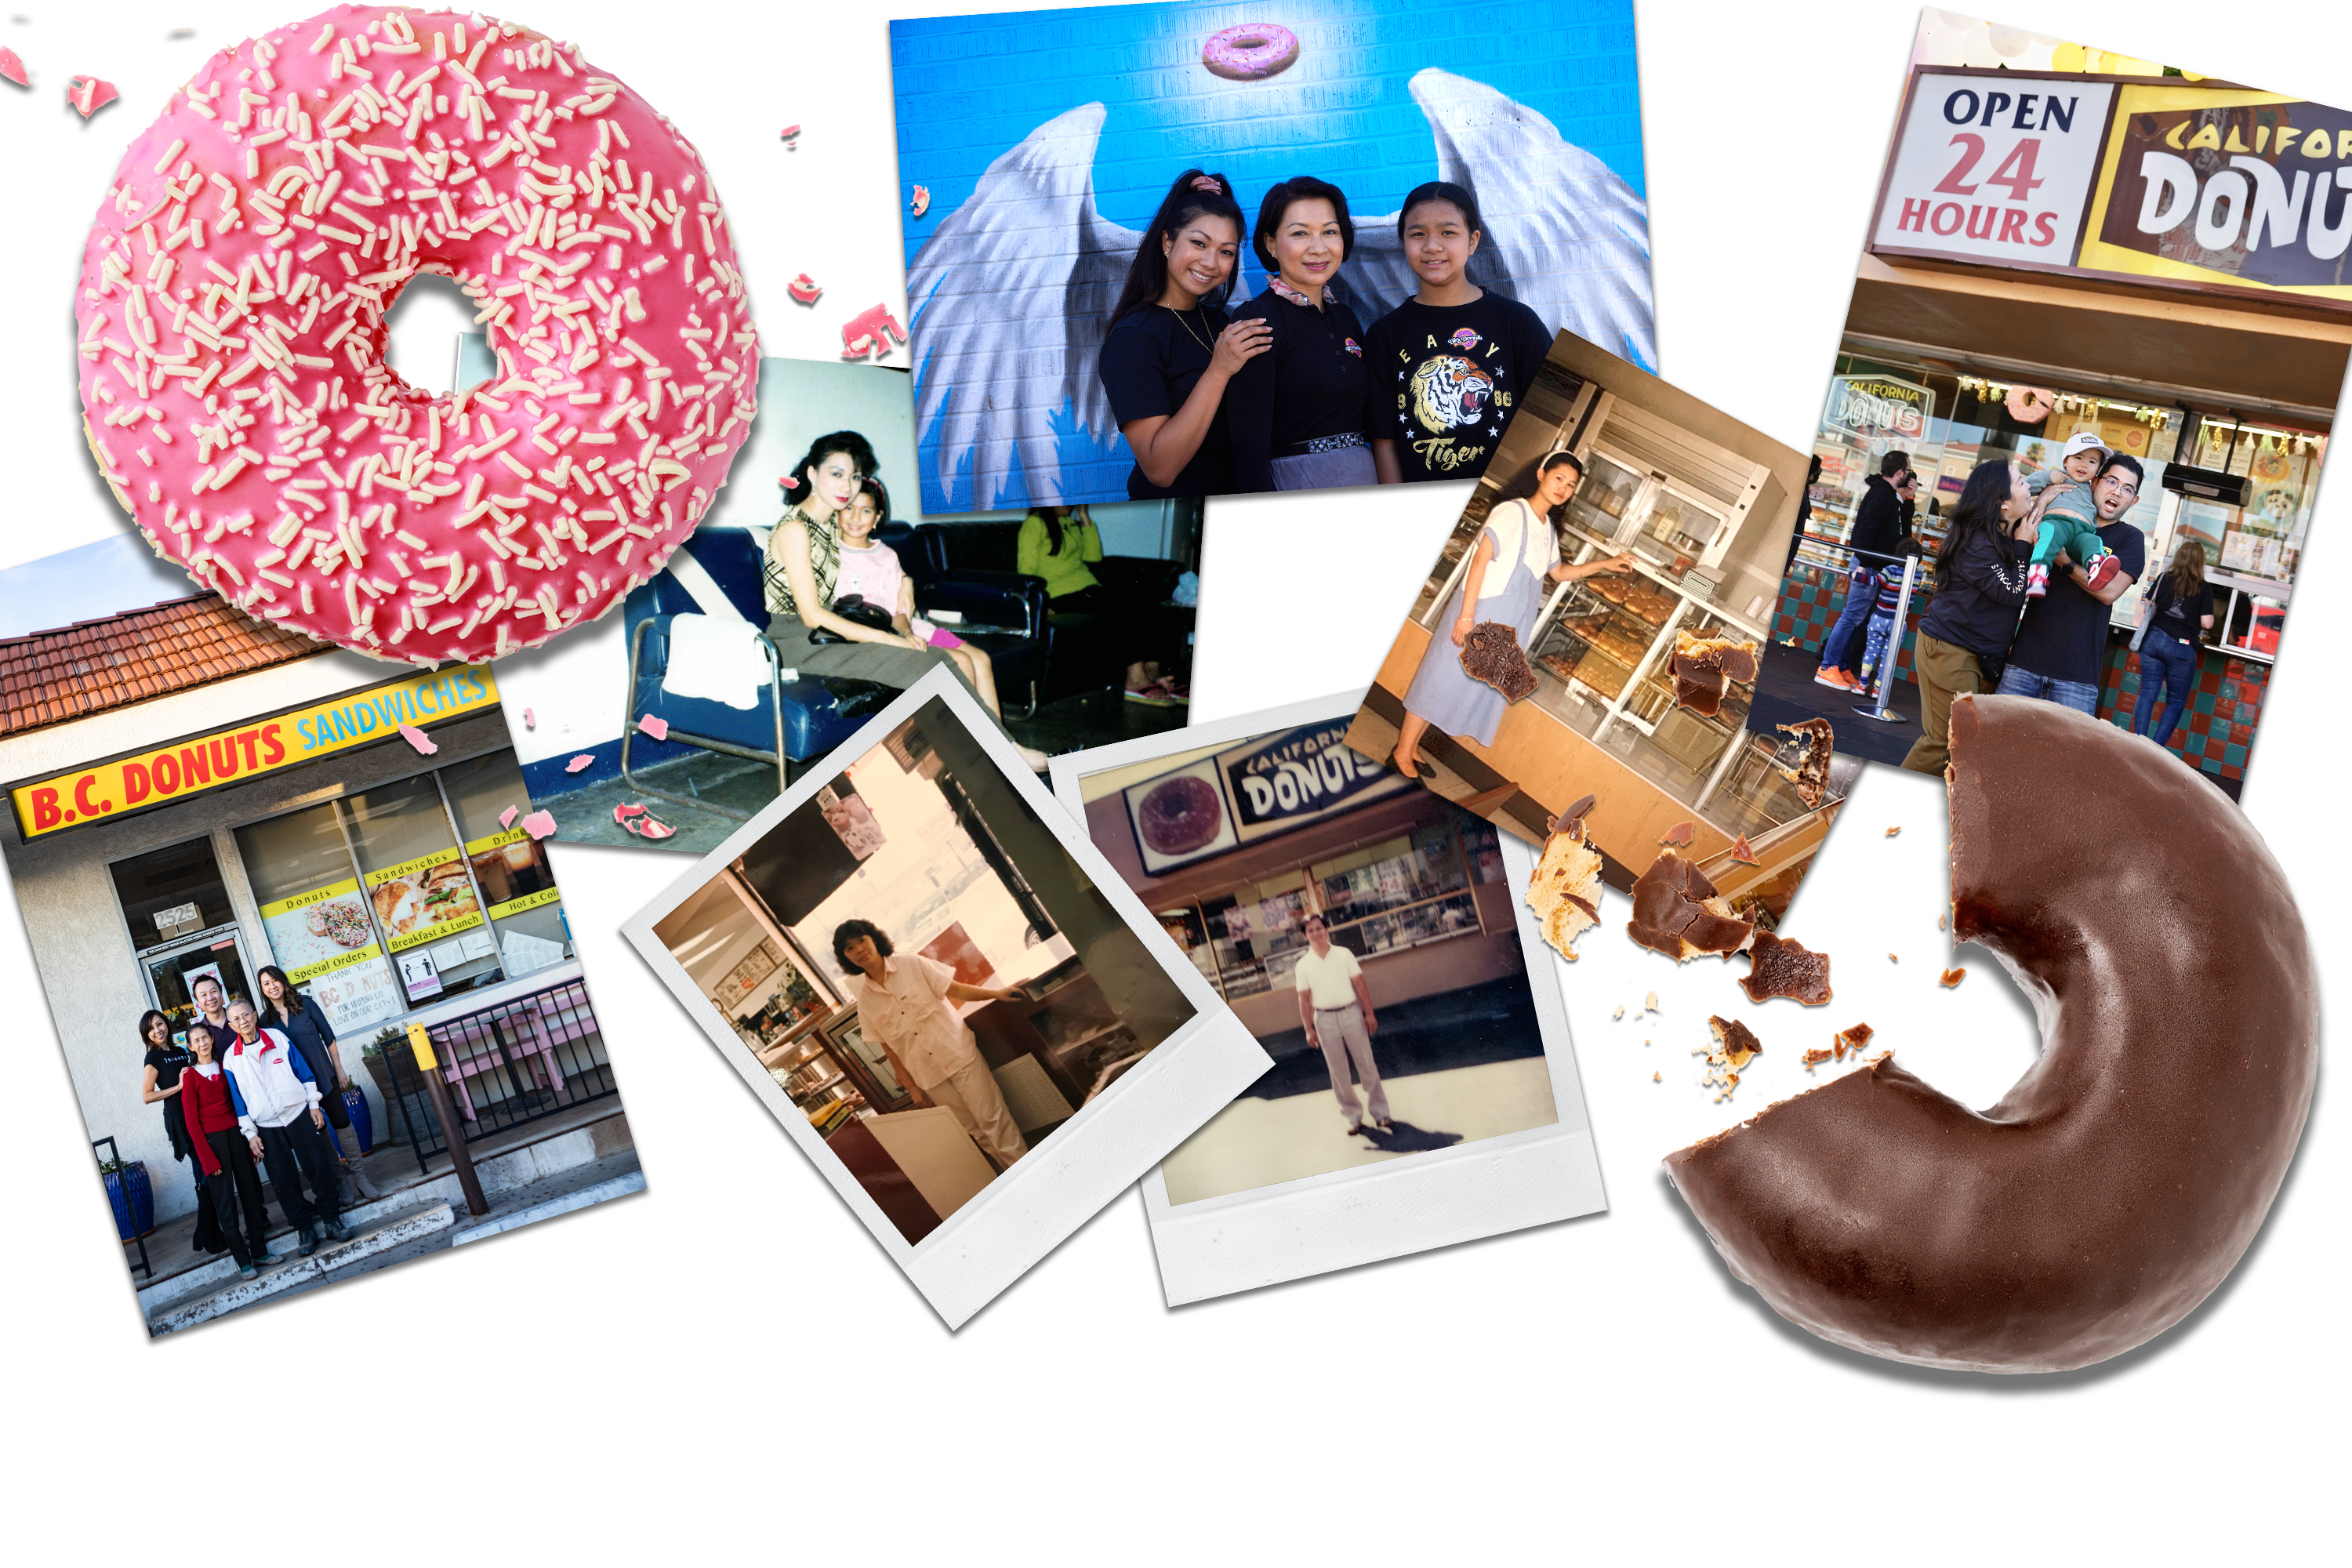 A collage of photos of the owners of family-owned doughnut shops